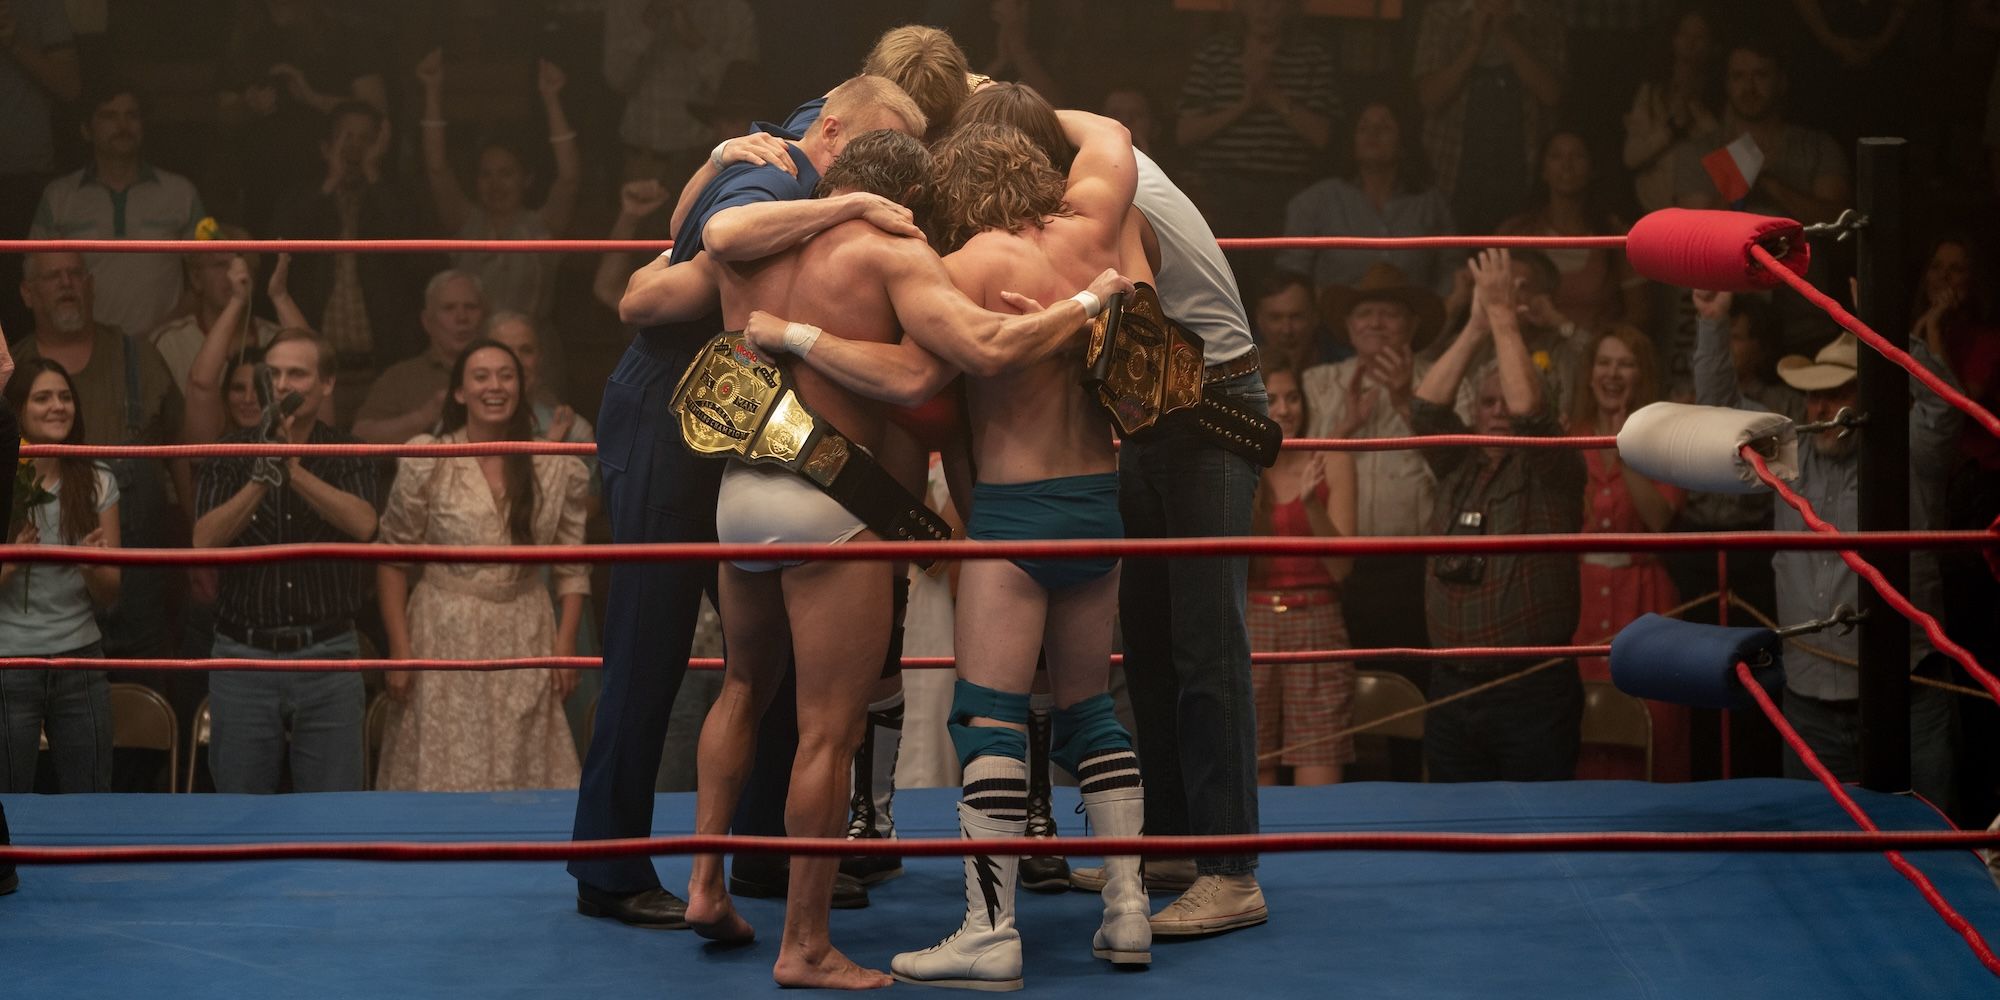 The Von Erich brothers and father hugging in a wrestling ring in The Iron Claw.